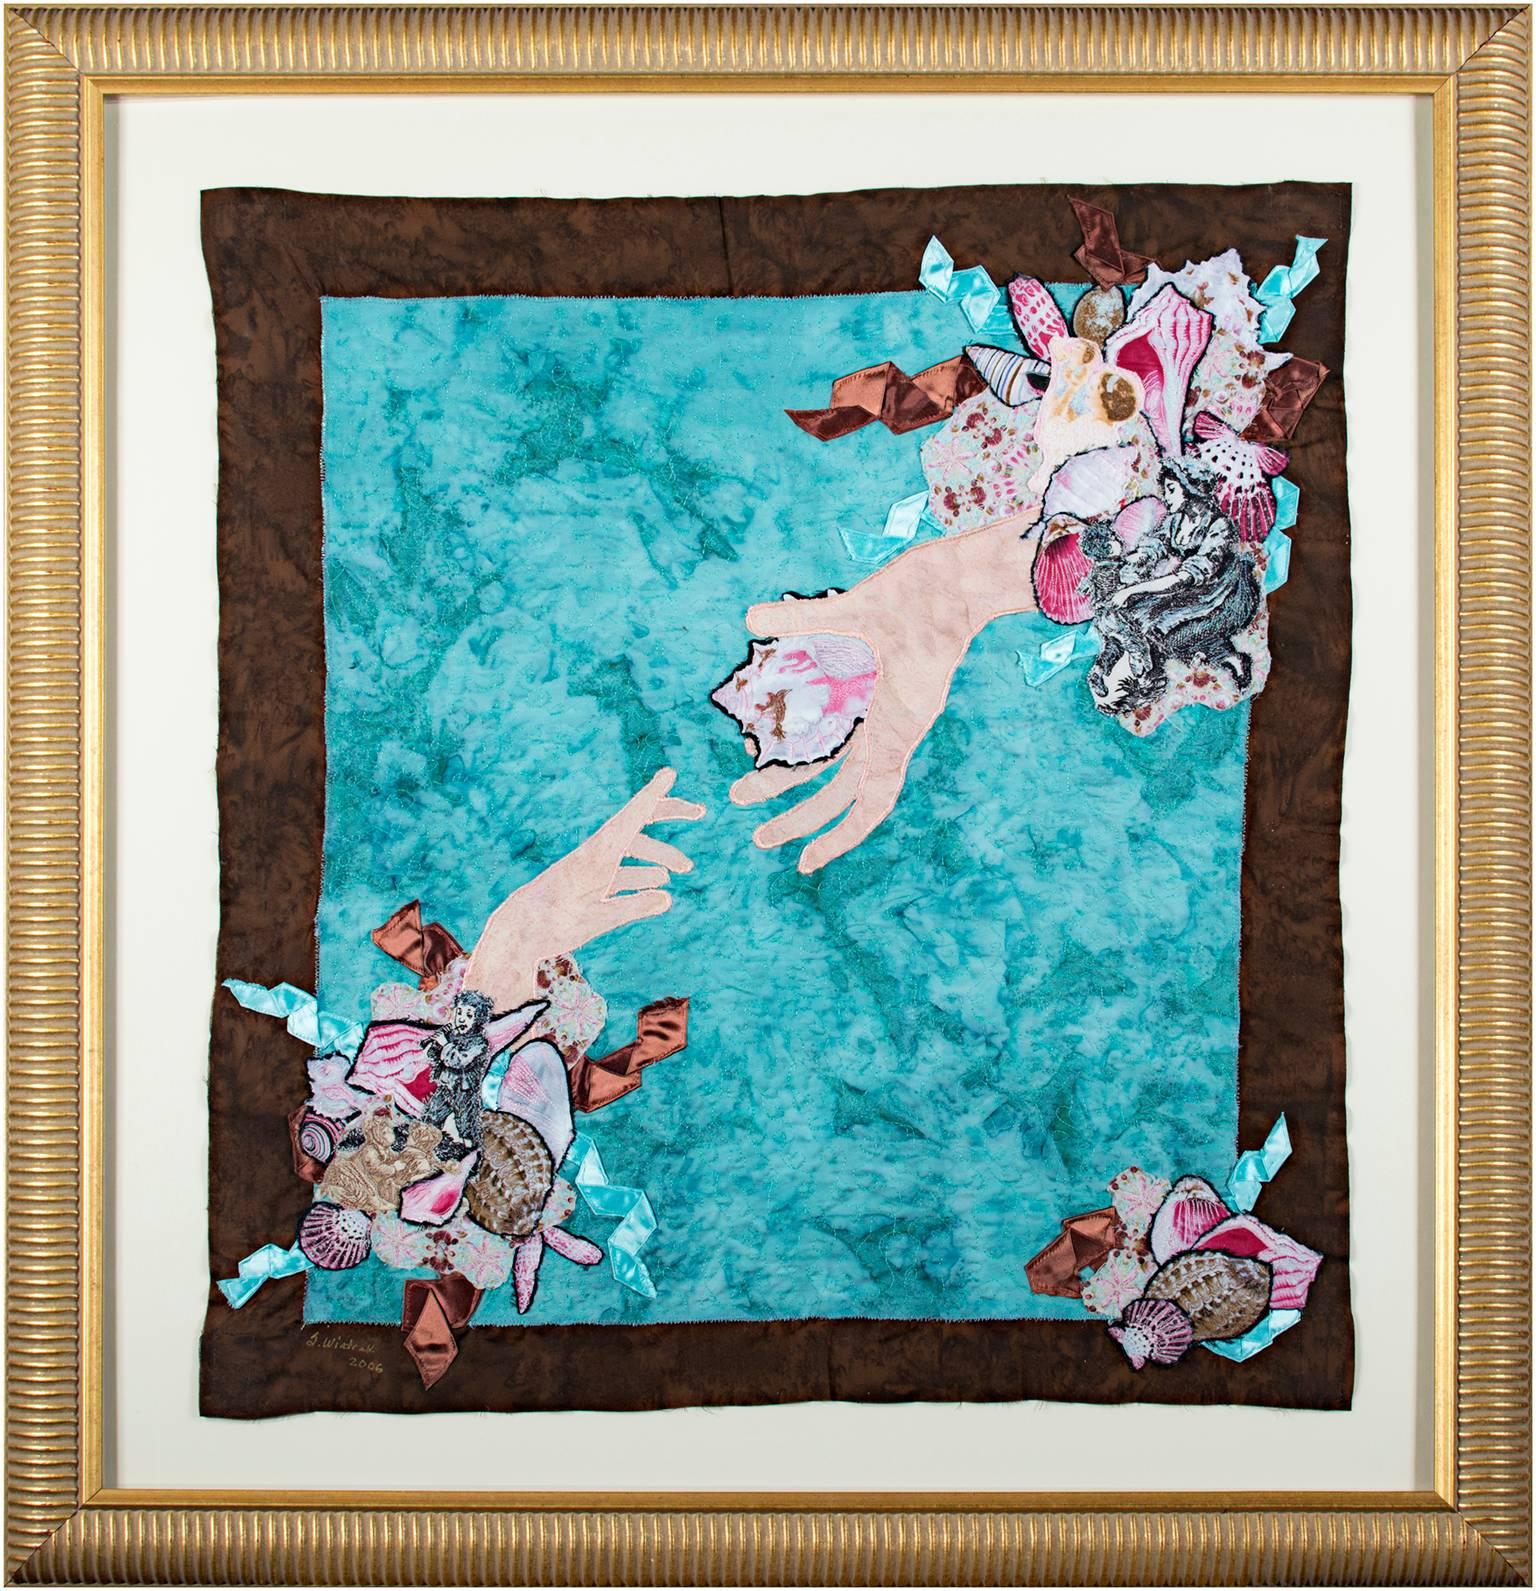 "Mother's Day (Hands & Seashells) is a mixed media textile piece by Stacy Wiatrak. It is signed and dated in the lower left corner. This piece depicts two hands reminiscent of Michelangelo's "Creation of Adam" gesturing towards one another from